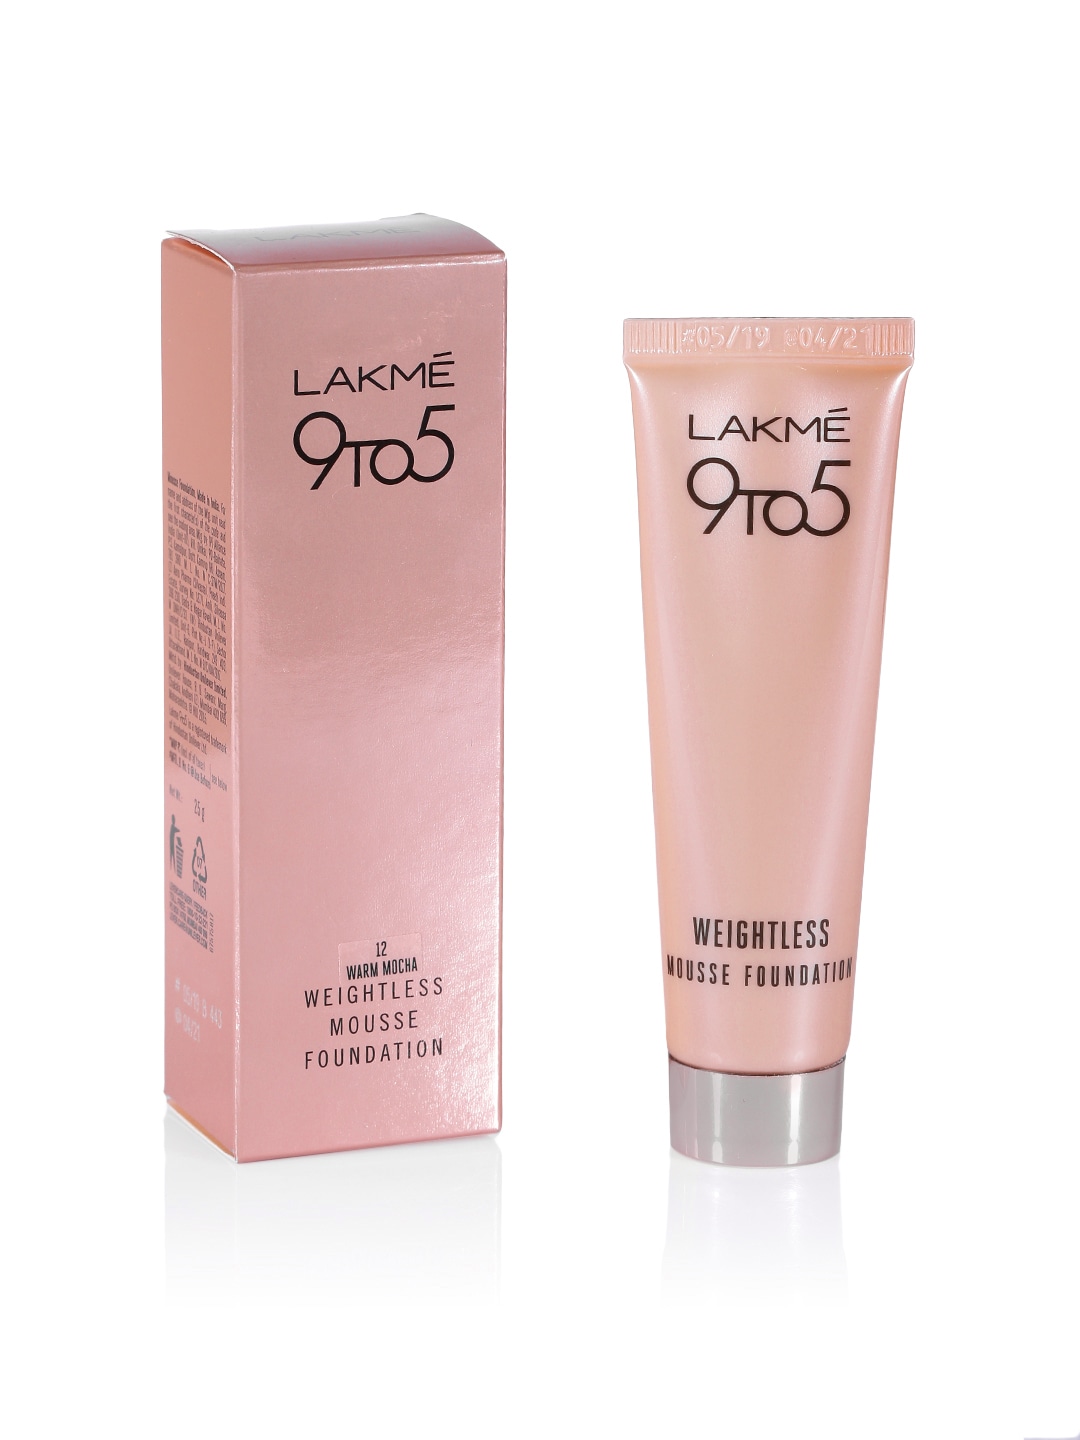 Lakme Women 9 to 5 Weightless Mousse Foundation - Warm Mocha 12 25g Price in India